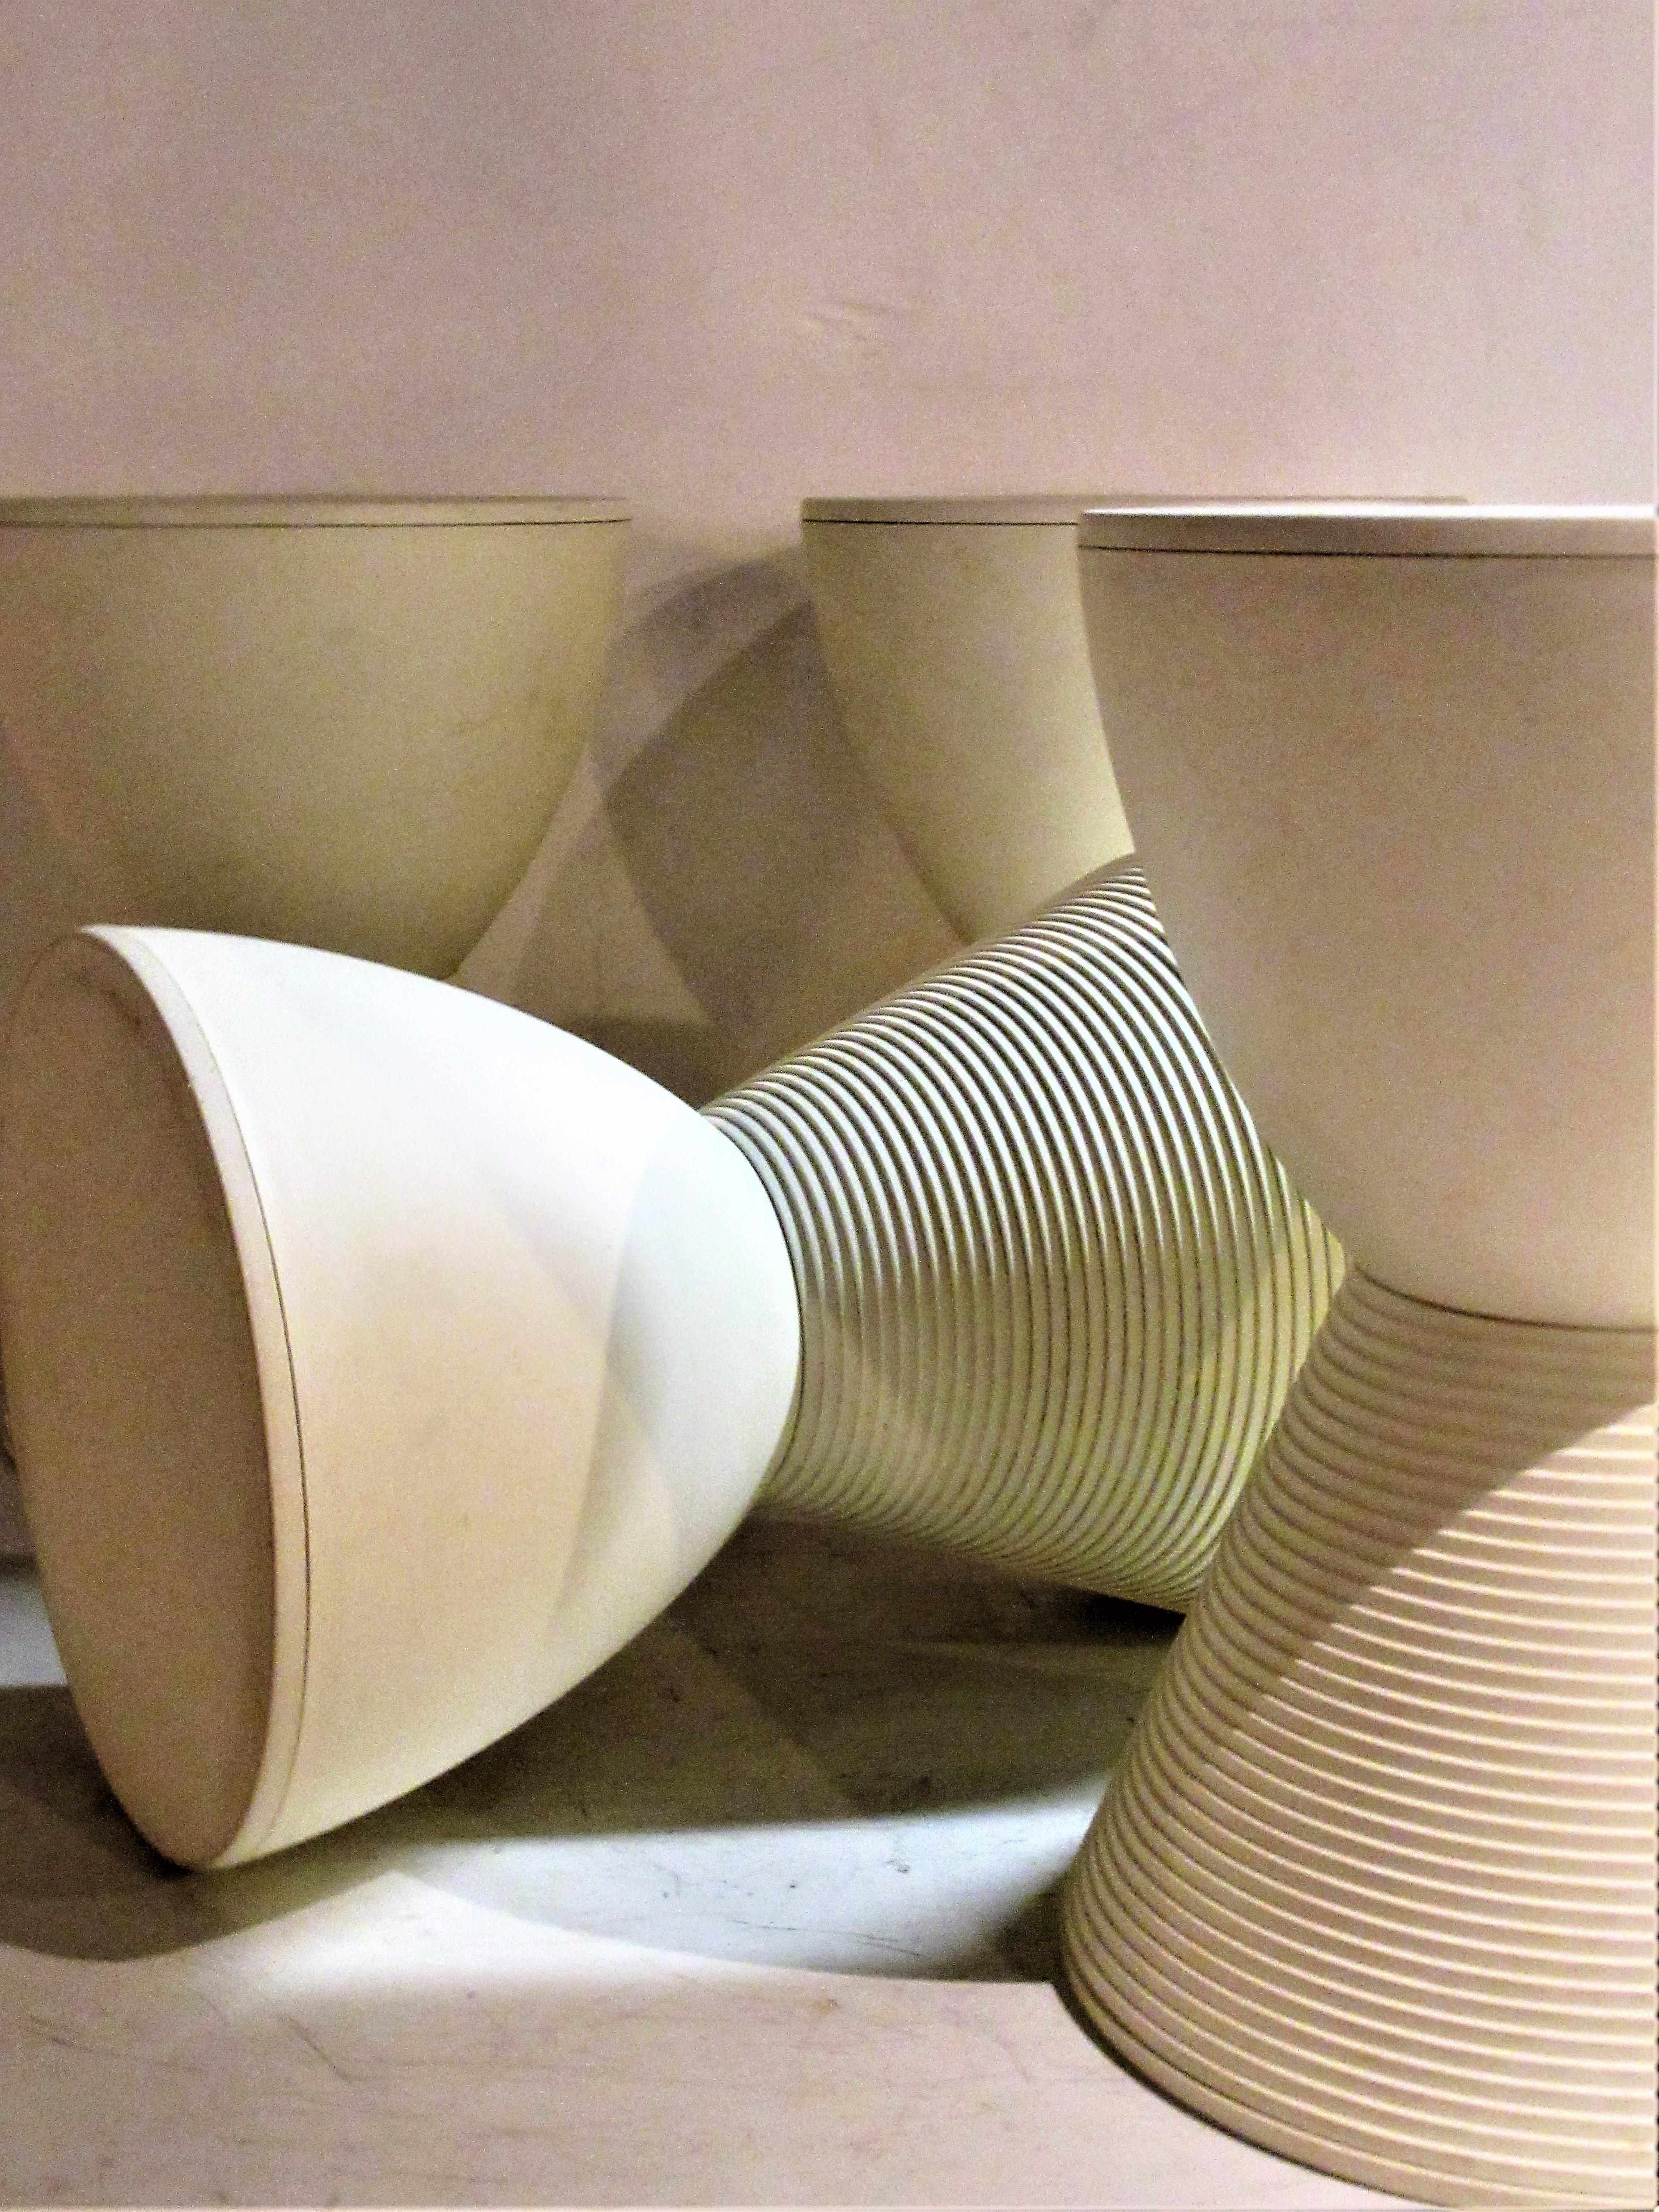 Molded Set of Four Prince Aha Stools by Philippe Starck for Kartell, Italy, 1999